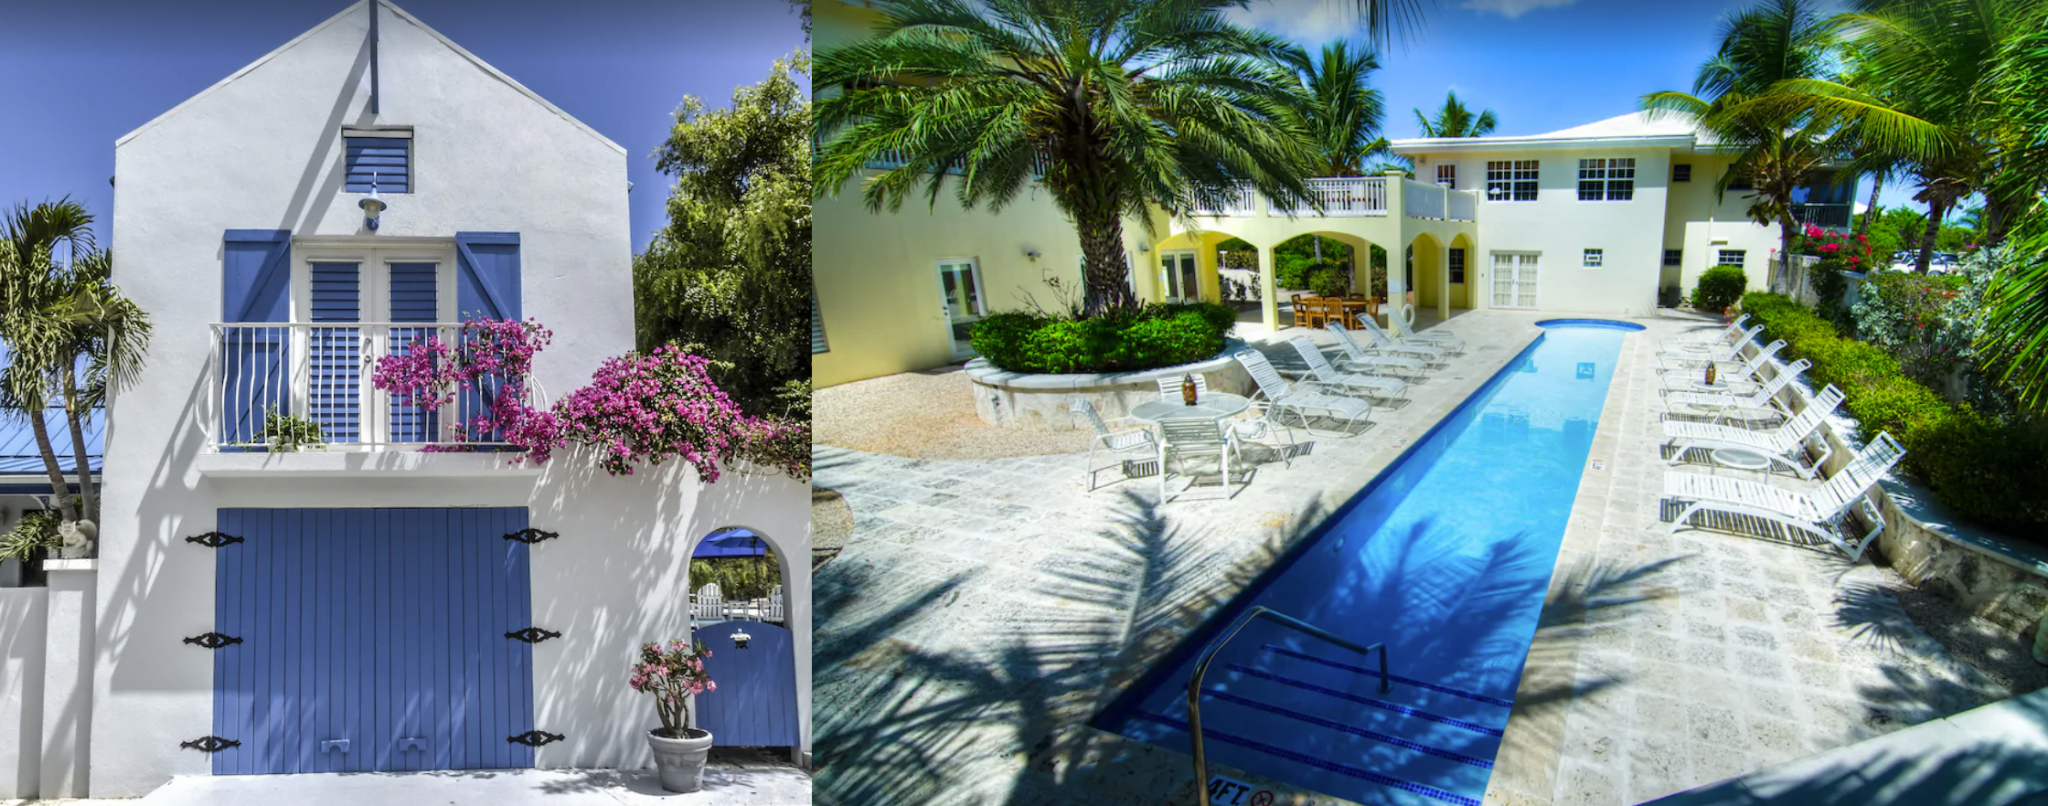 Two side by side images of a small luxury vacation rental in Turks and Caicos. On the left is the front facade of the home, featuring a blue barn door entrance and window shades. On the right is the pool area, surrounded by lounge chairs.